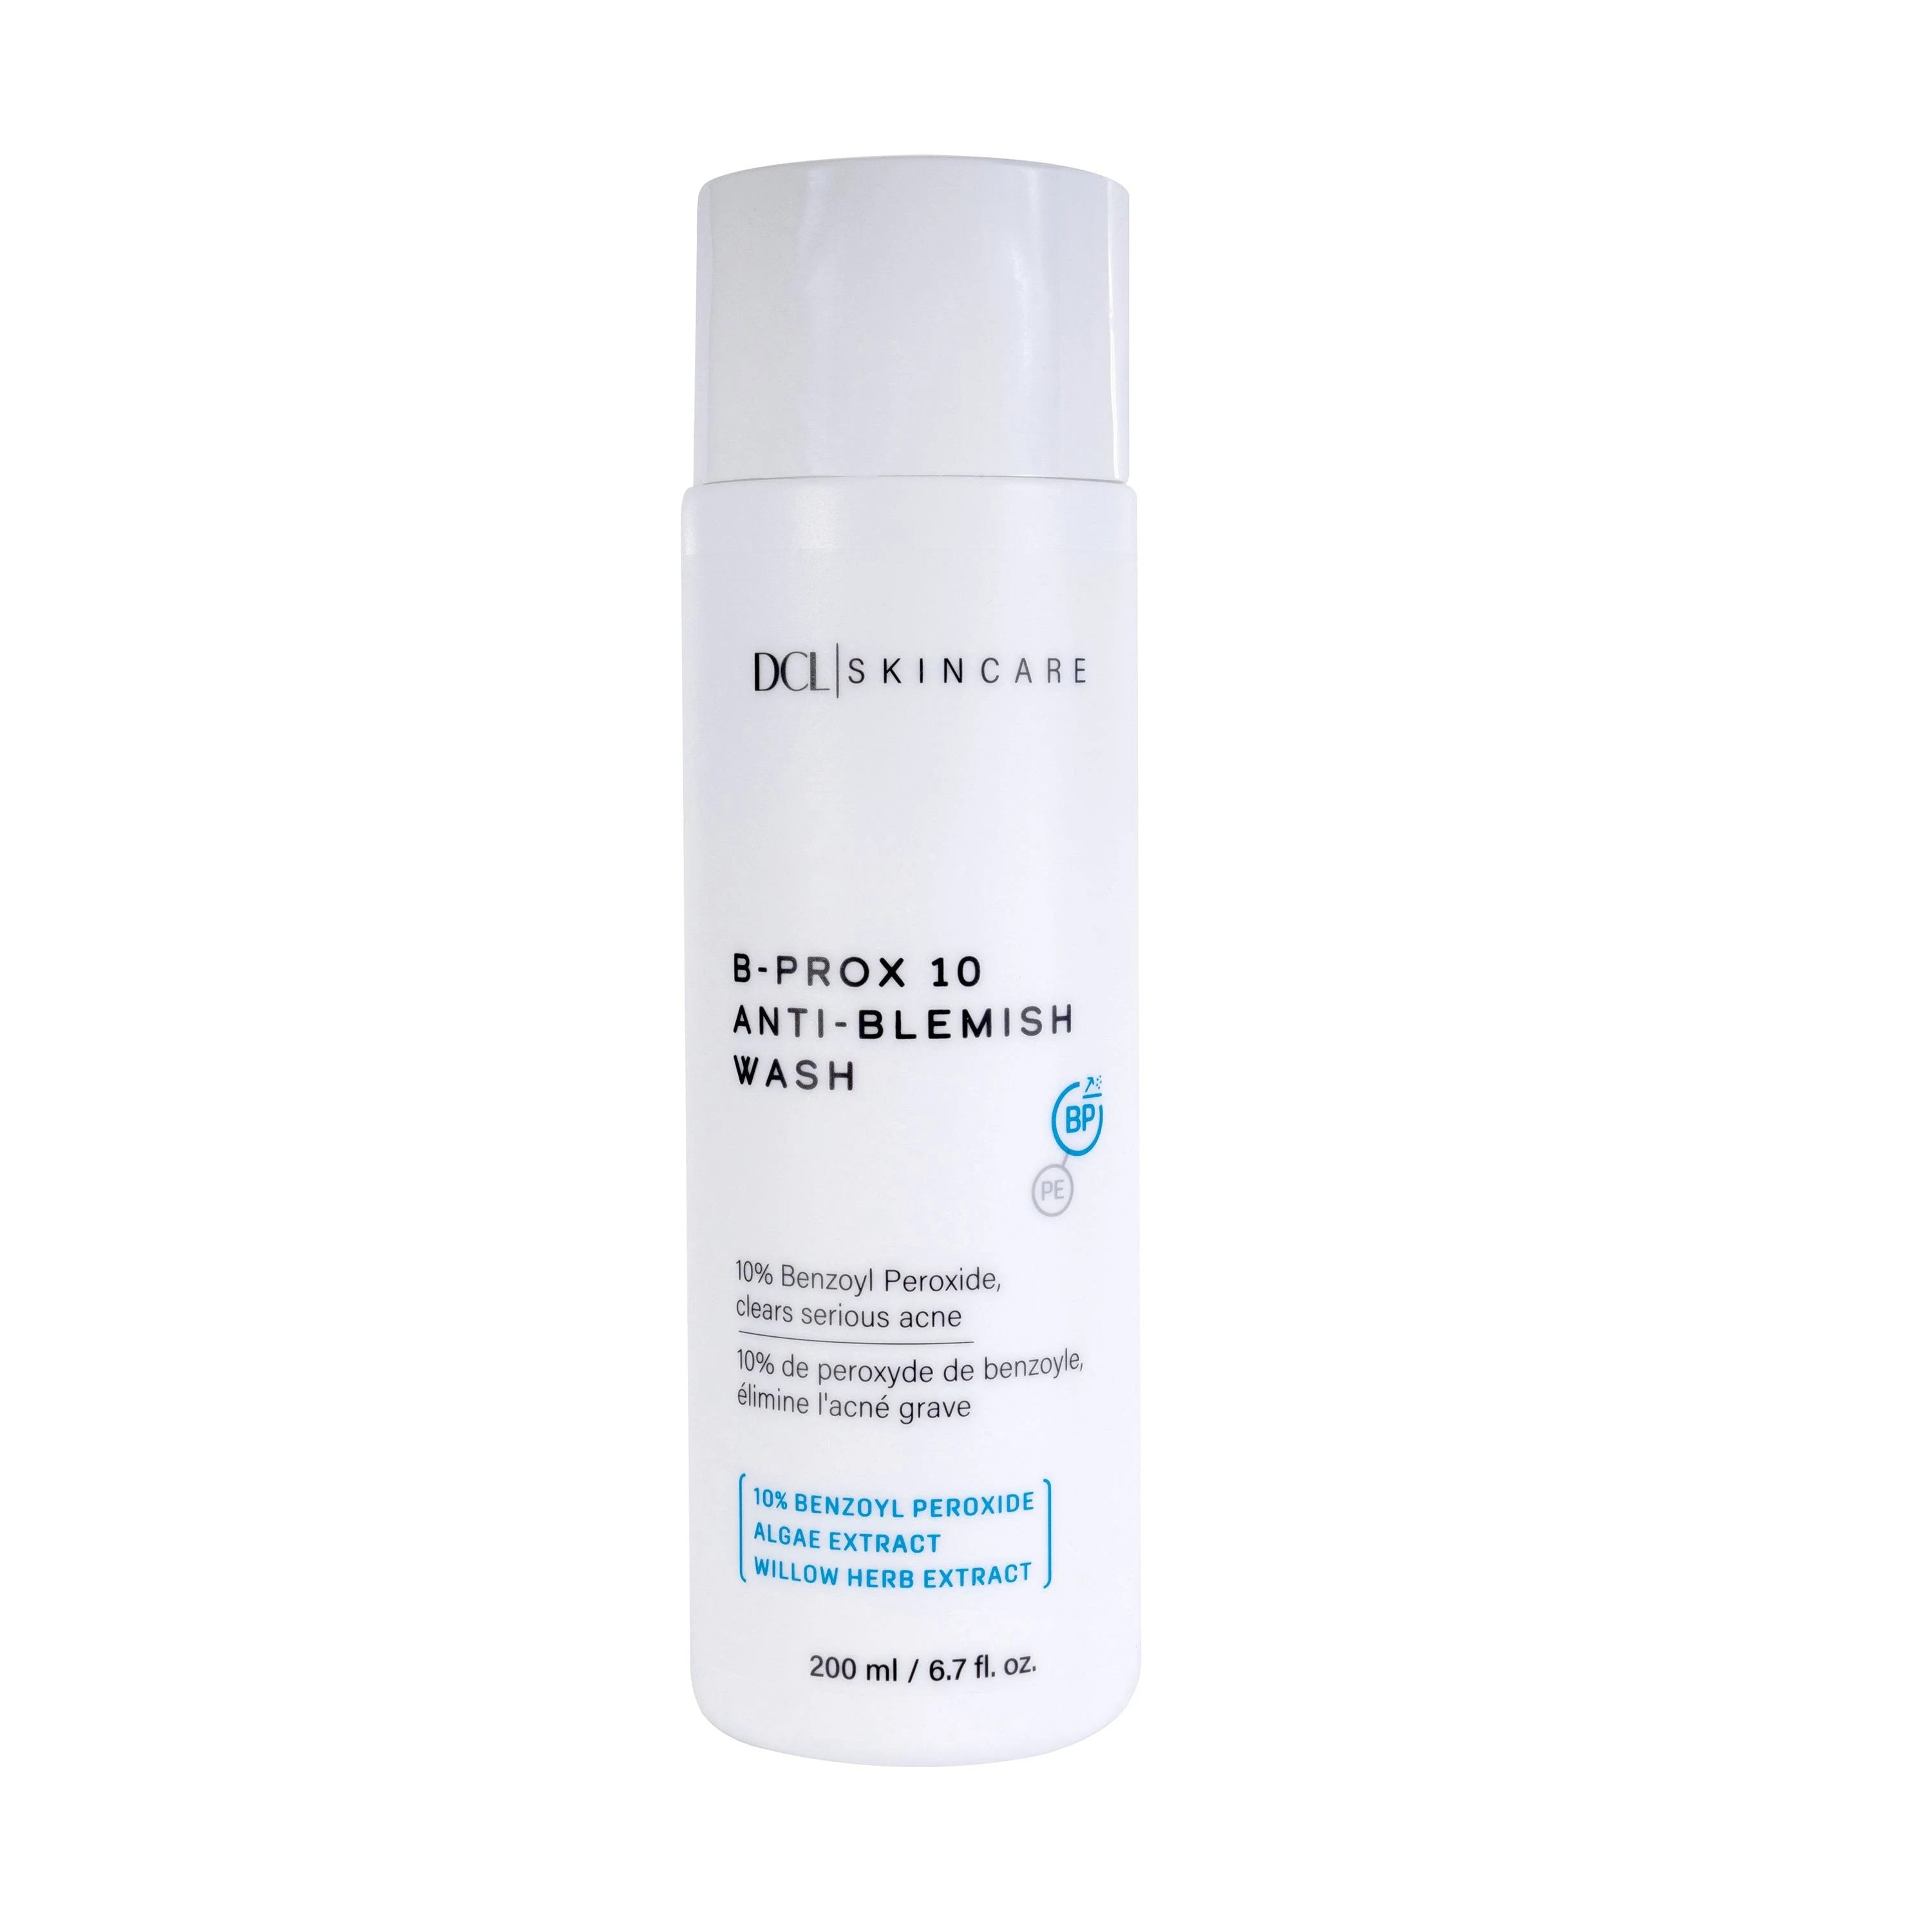 Benzoyl Peroxide Acne Cleanser for Sensitive Skin | Image